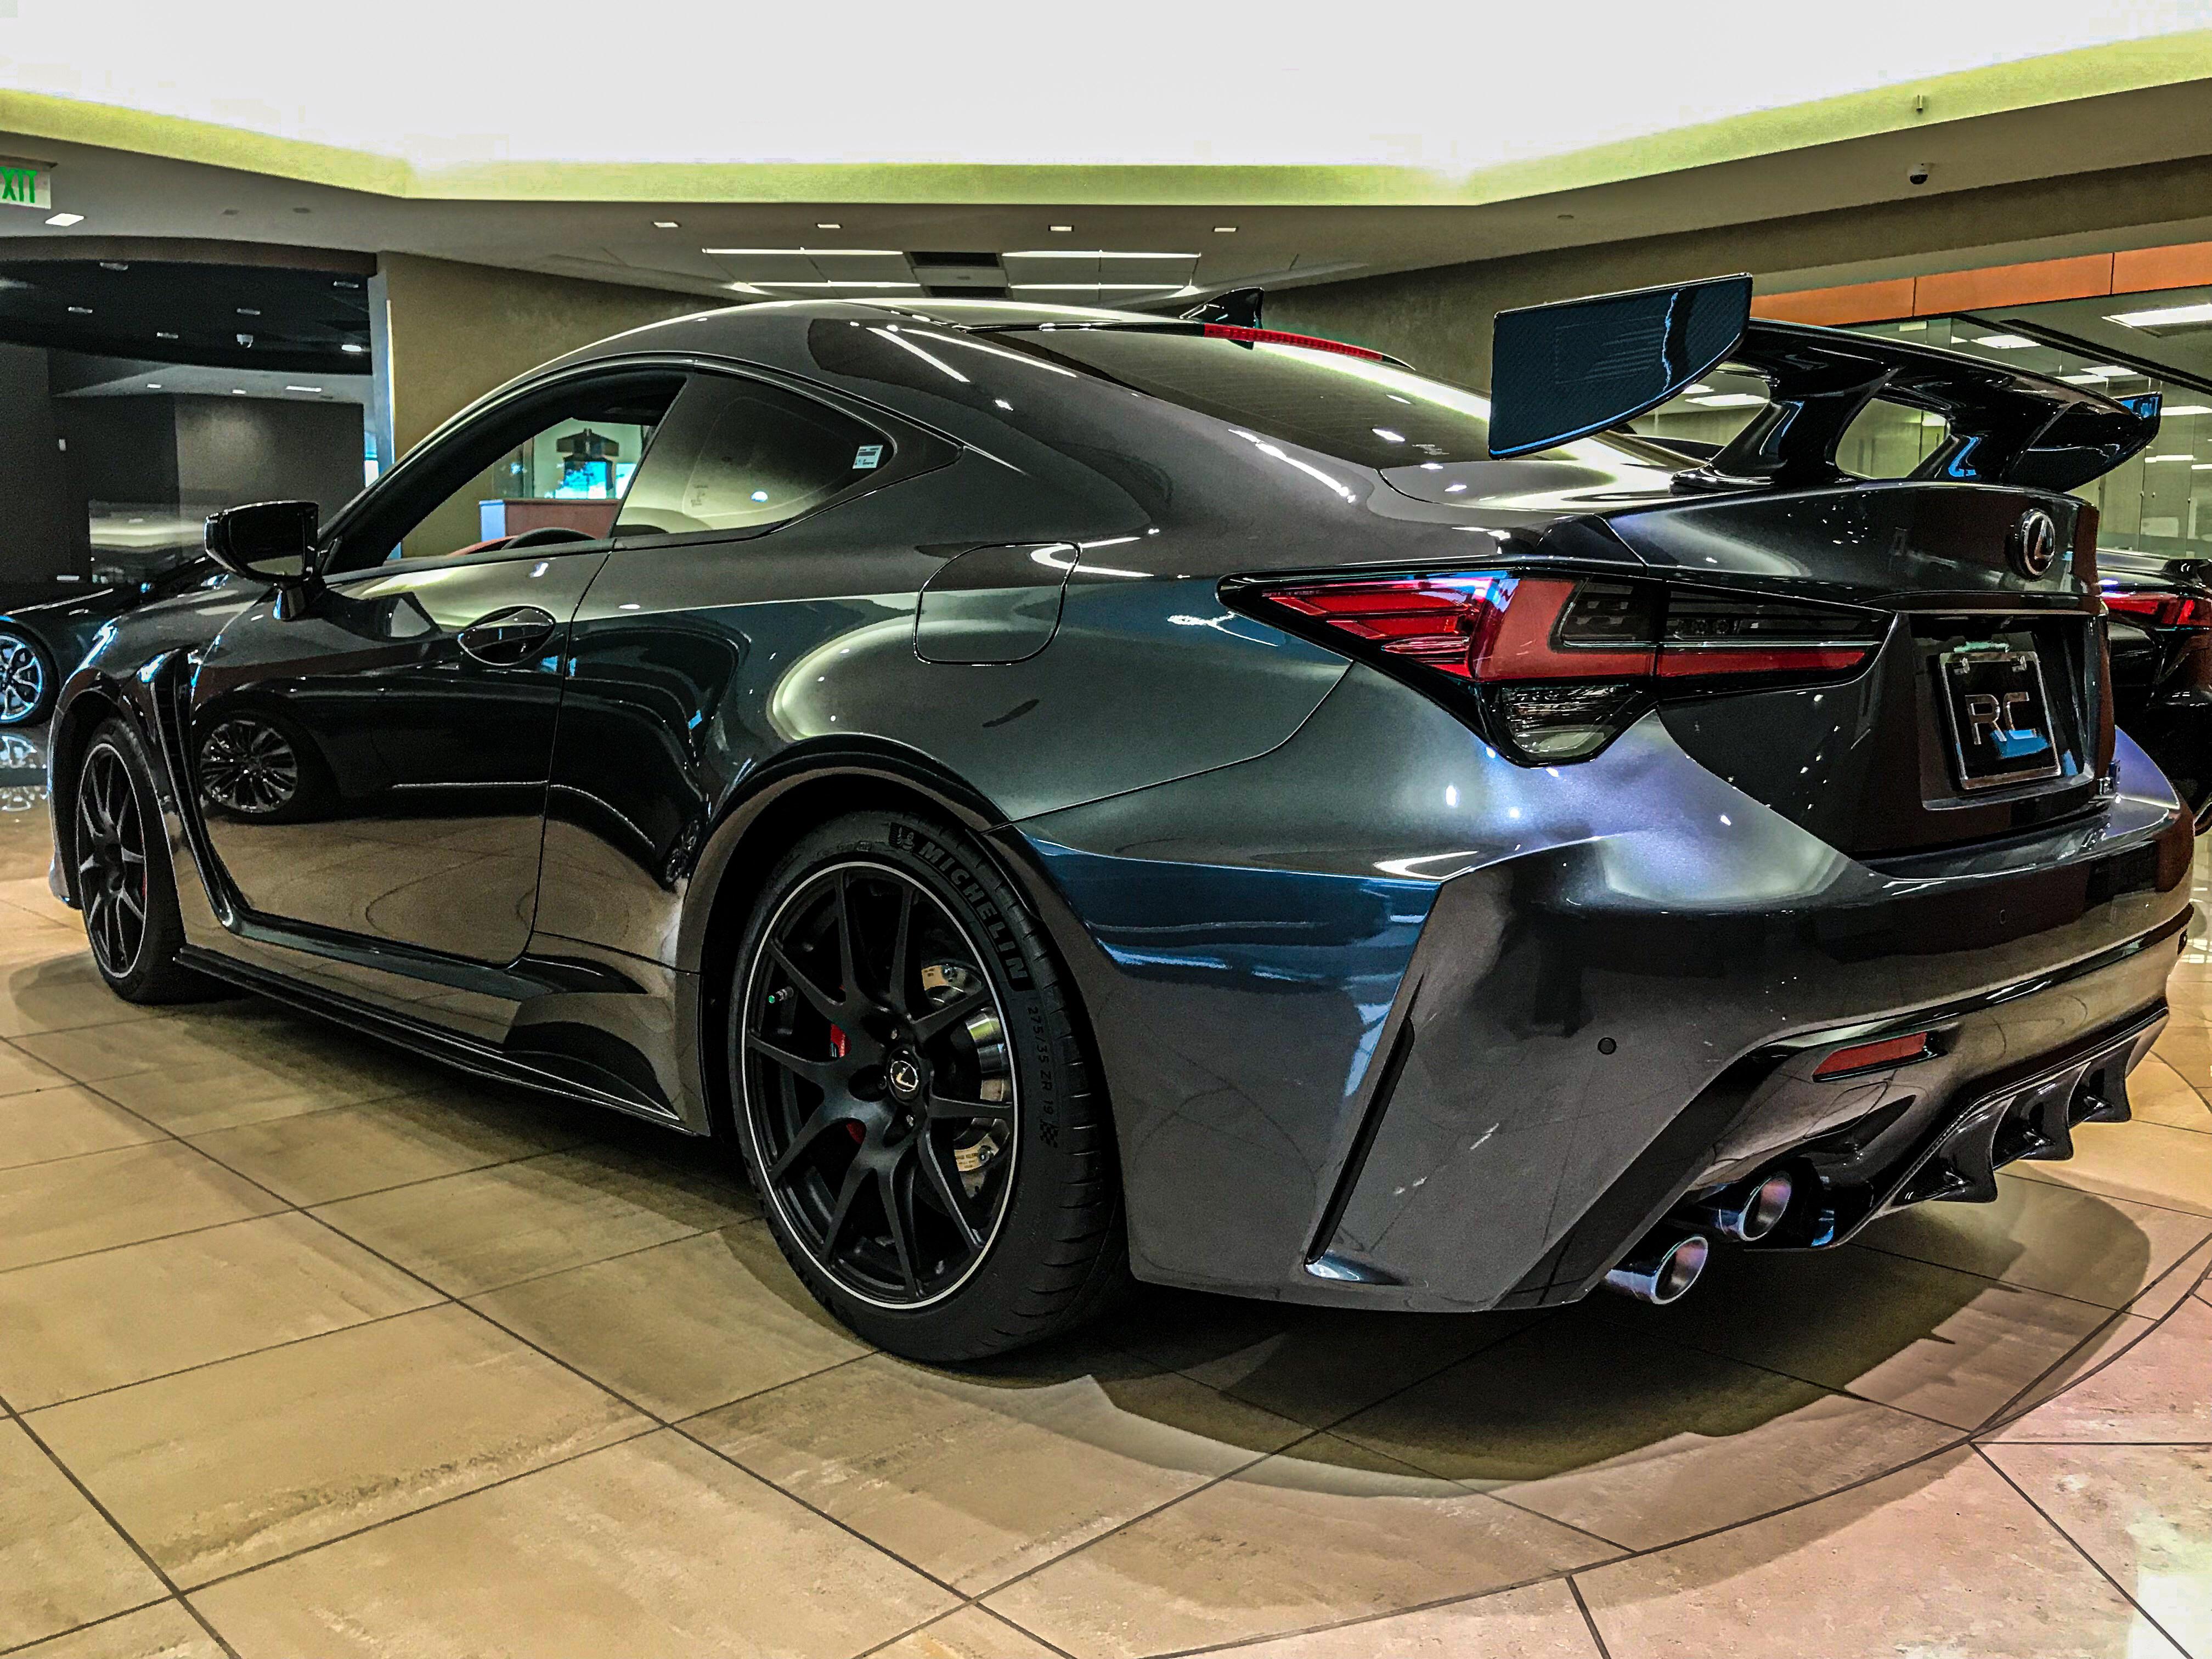 Thoughts on the 2022 Lexus RC F Fuji Speedway Edition? : r/Lexus